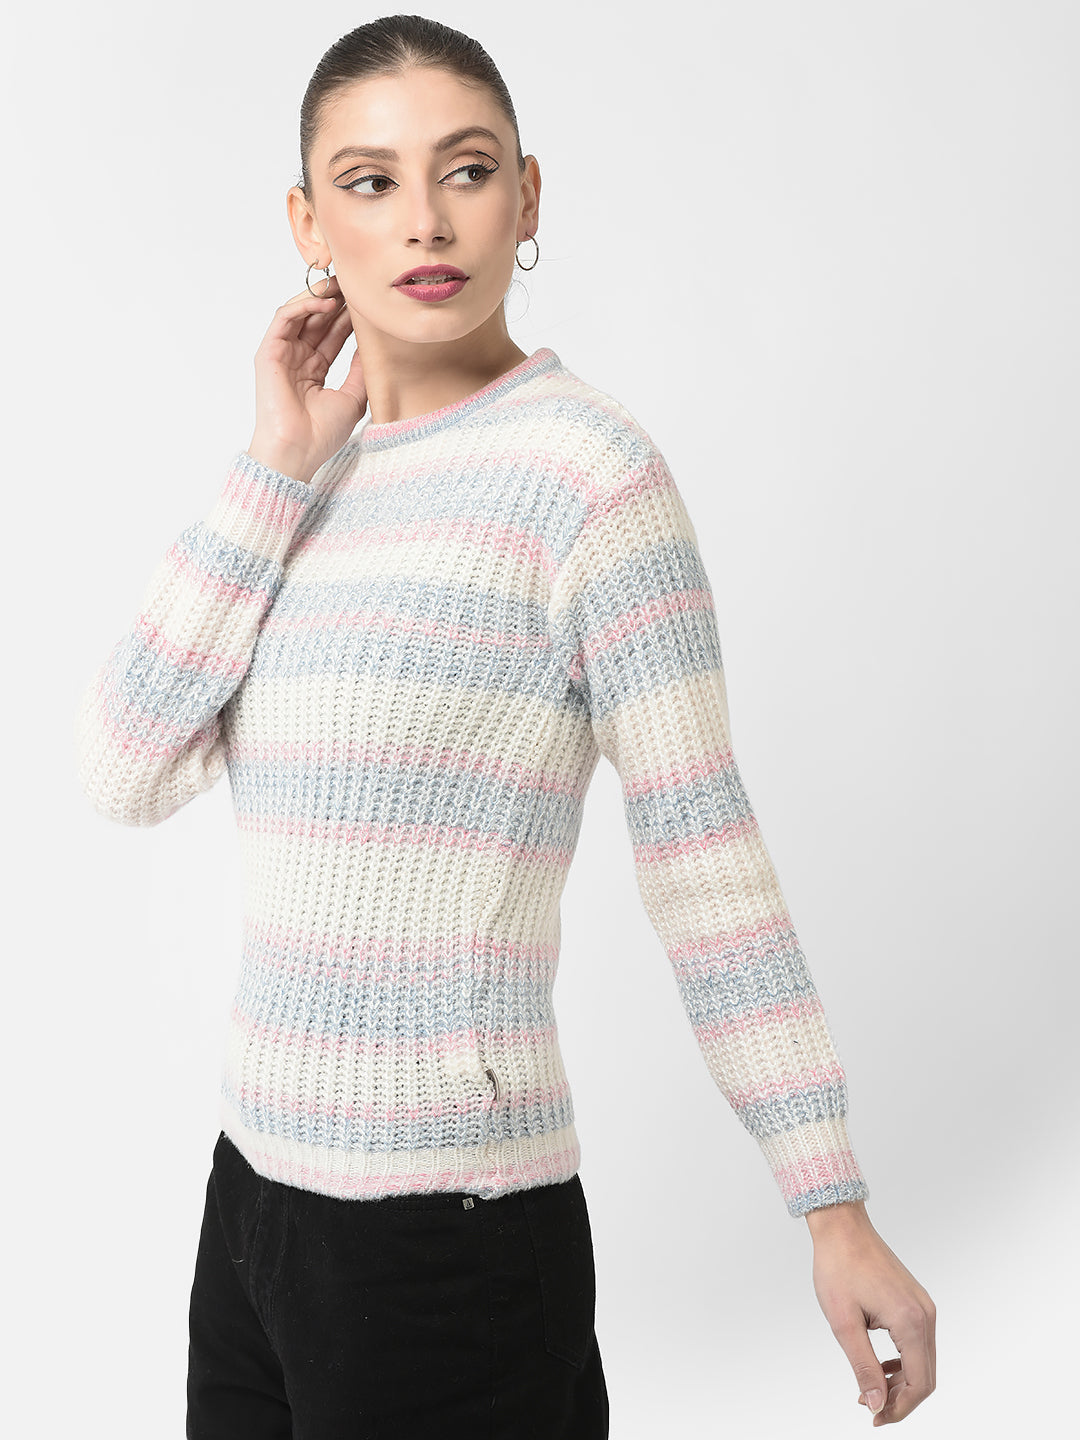  Knitted Striped Sweater